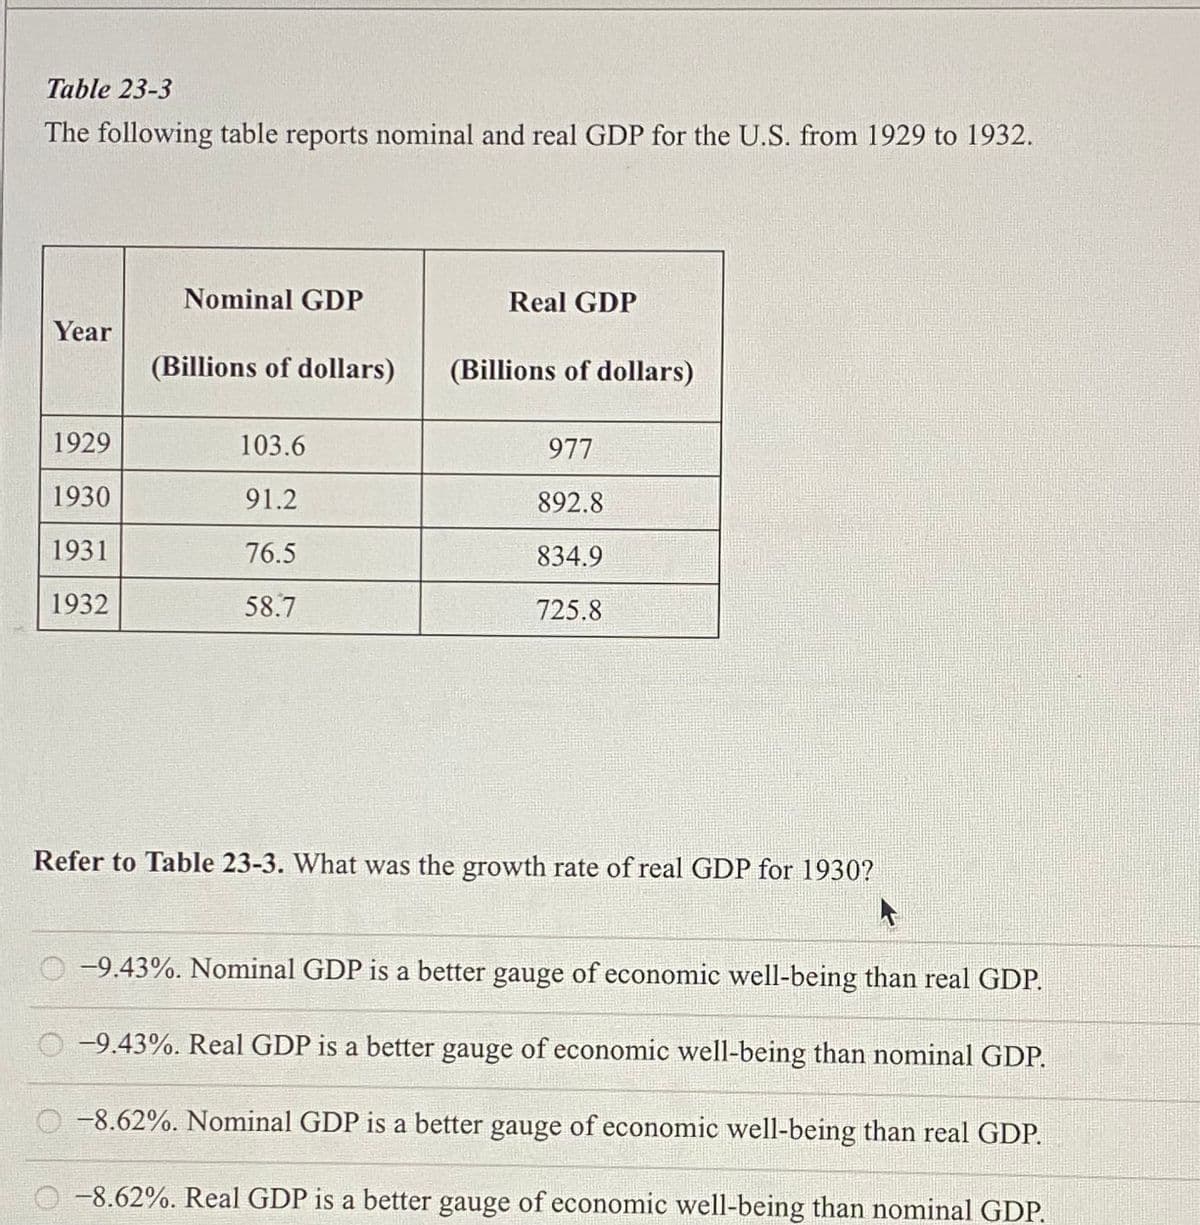 Table 23-3
The following table reports nominal and real GDP for the U.S. from 1929 to 1932.
Year
1929
1930
1931
1932
Nominal GDP
(Billions of dollars)
103.6
91.2
76.5
58.7
Real GDP
(Billions of dollars)
977
892.8
834.9
725.8
Refer to Table 23-3. What was the growth rate of real GDP for 1930?
-9.43%. Nominal GDP is a better gauge of economic well-being than real GDP.
-9.43%. Real GDP is a better gauge of economic well-being than nominal GDP.
-8.62%. Nominal GDP is a better gauge of economic well-being than real GDP.
-8.62%. Real GDP is a better gauge of economic well-being than nominal GDP.